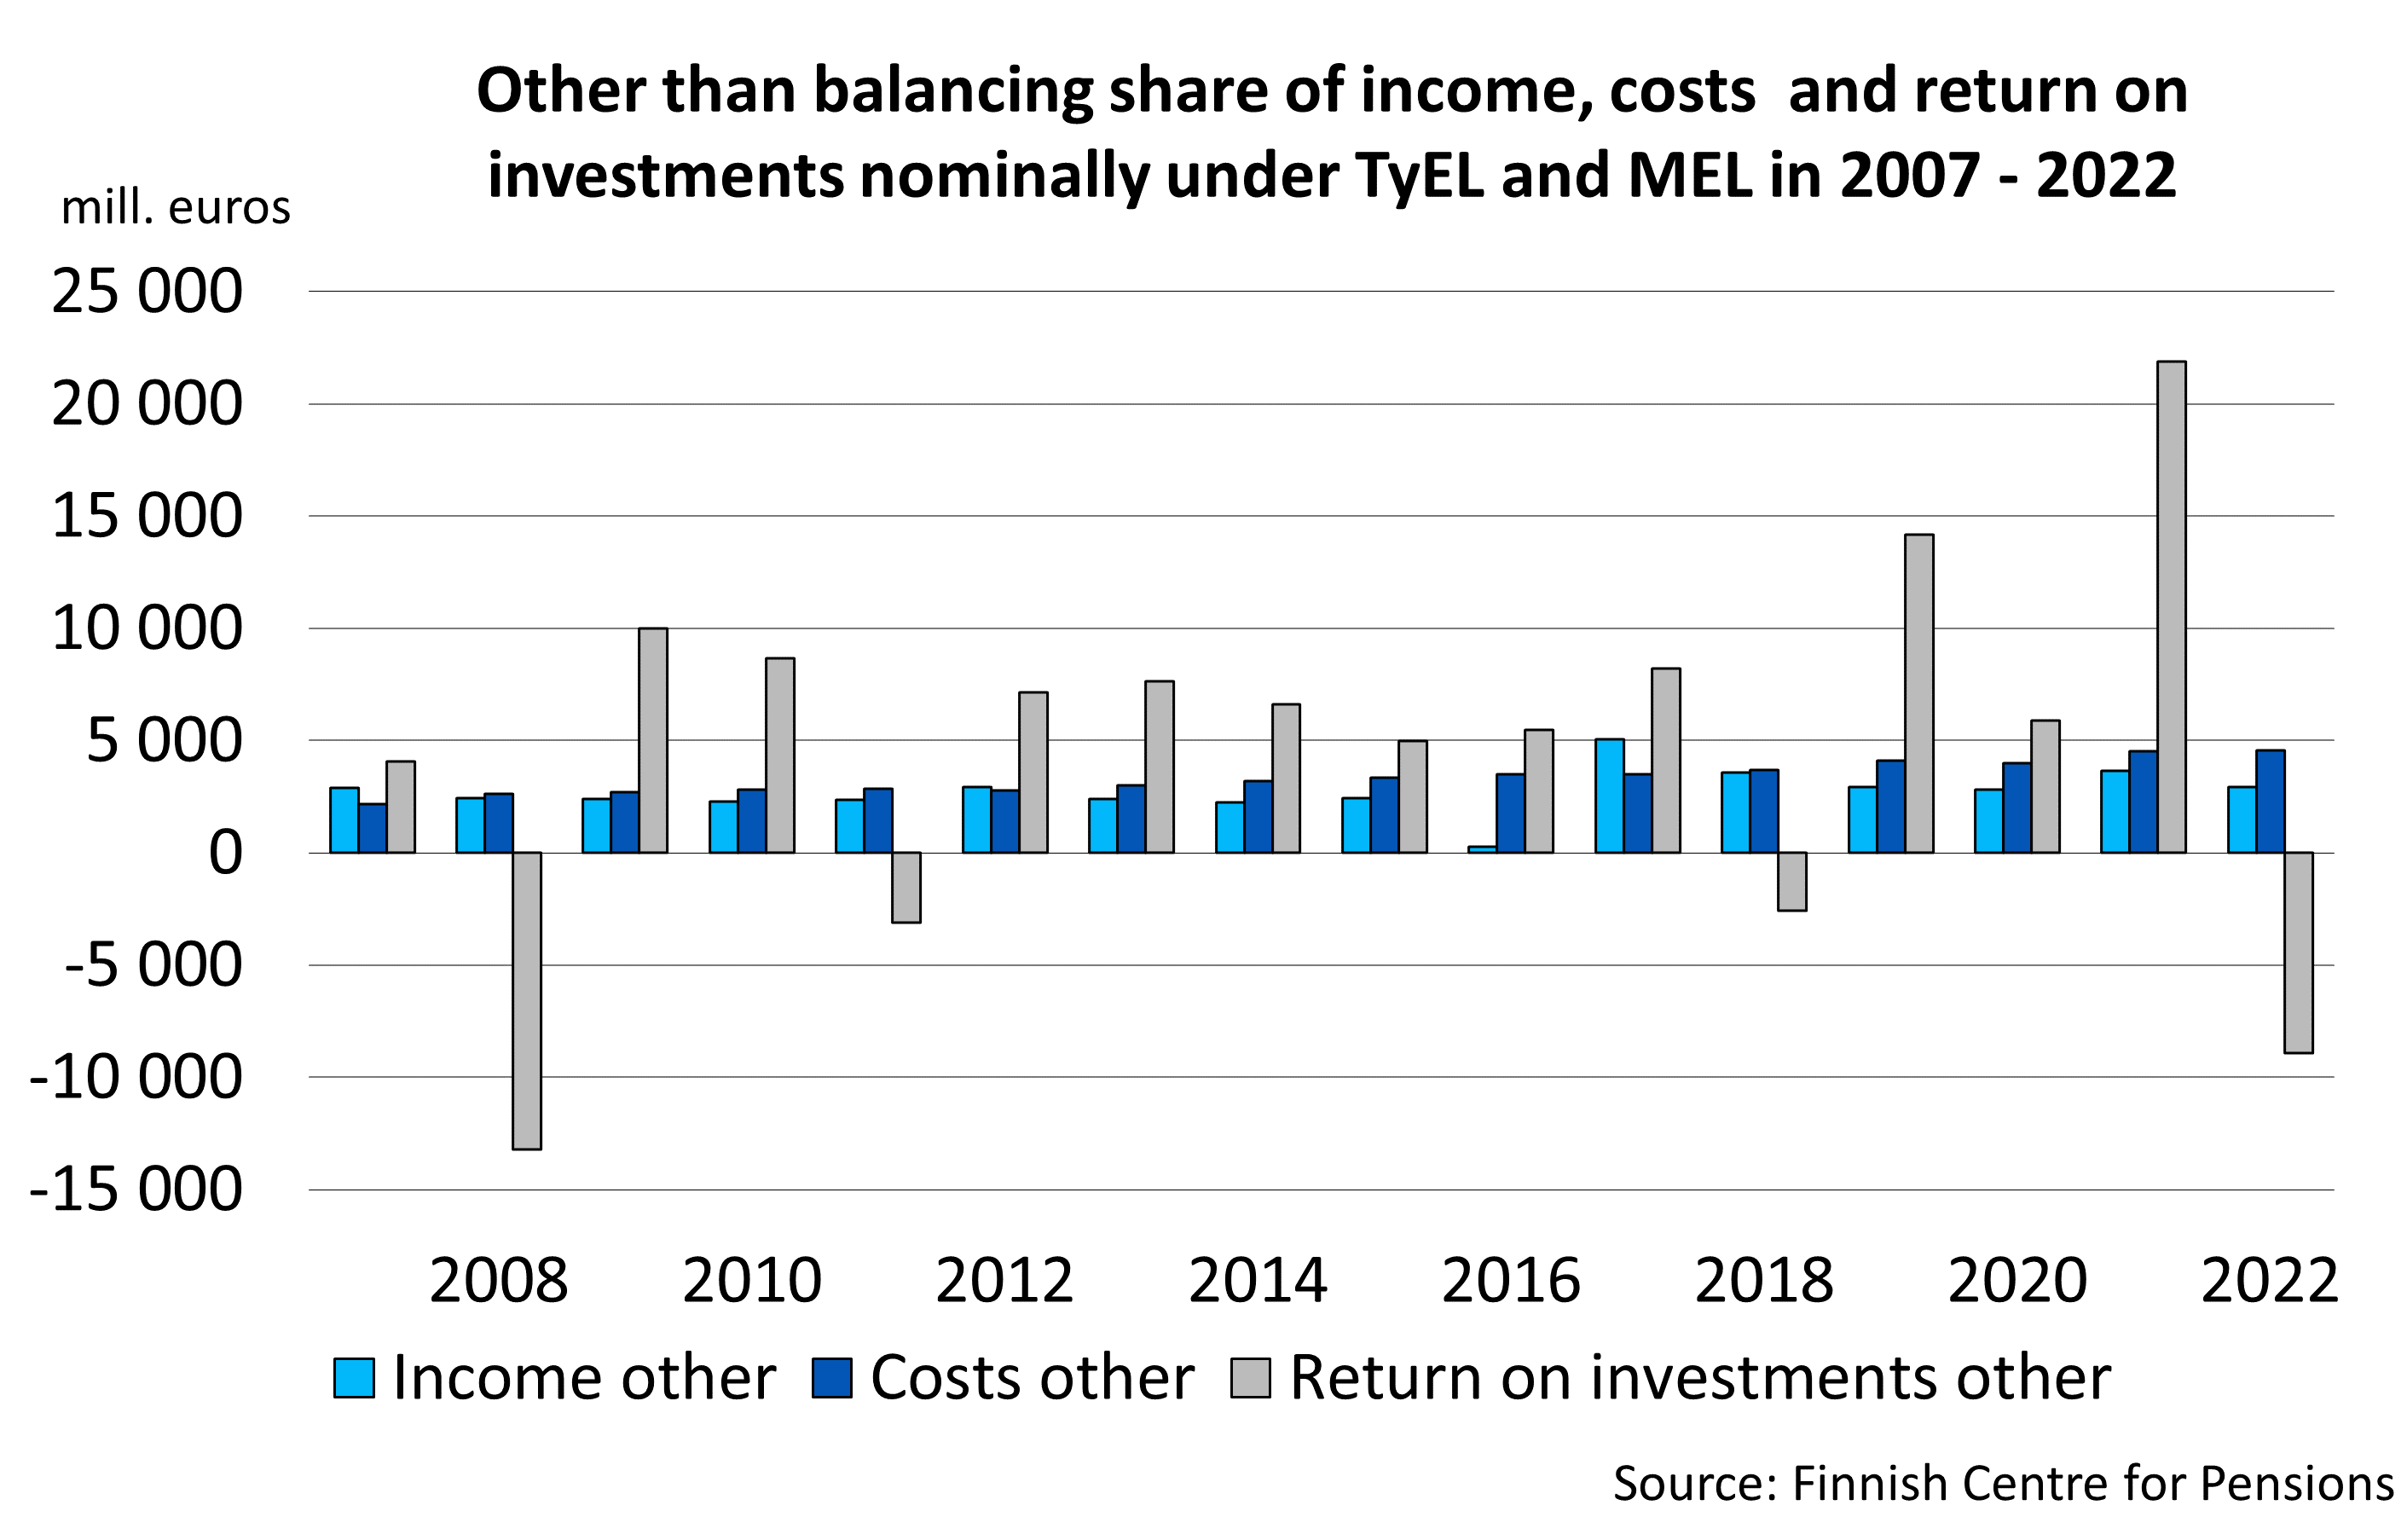 Other than balancing share of income, costs  and return on investments nominally under TyEL and MEL in 2007 - 2020